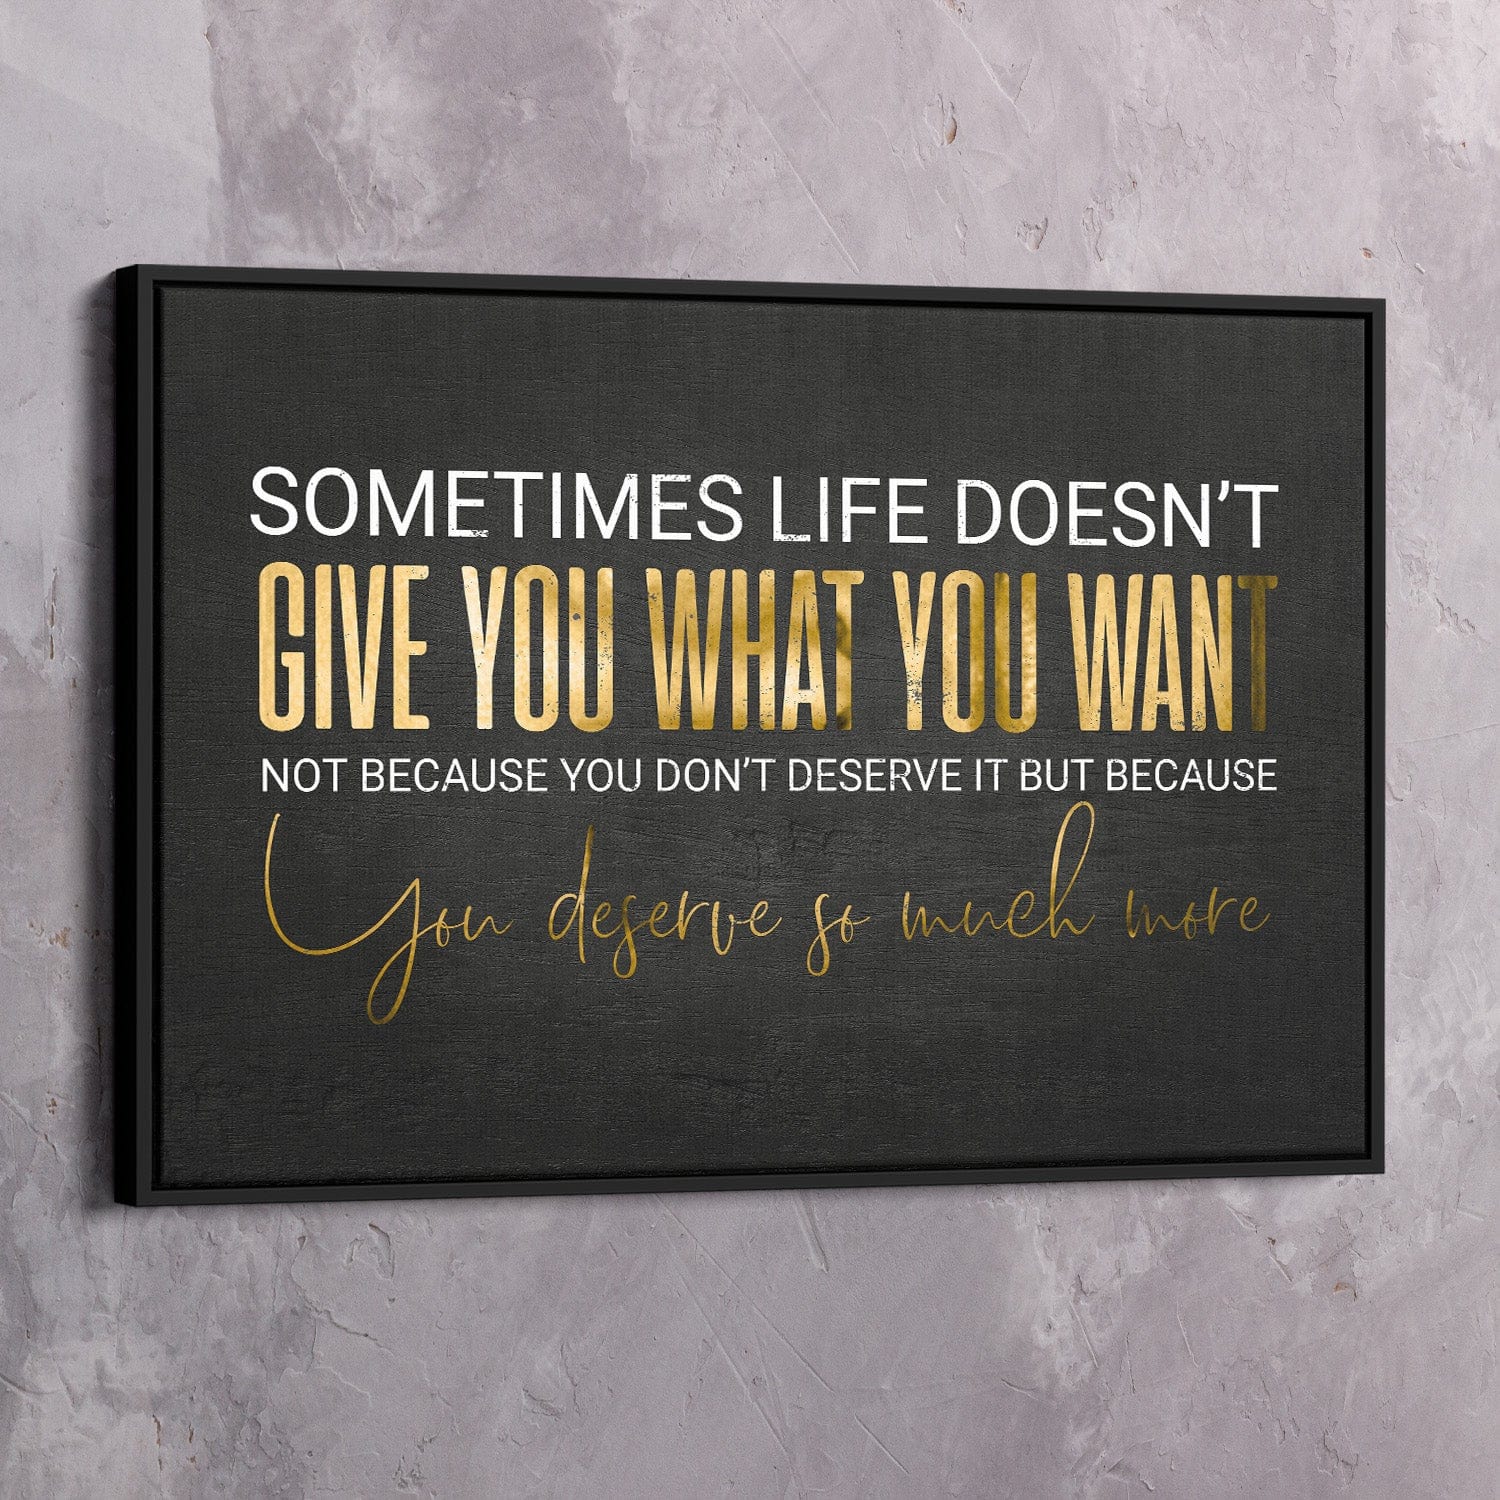 Sometimes Life Doesn't Wall Art | Inspirational Wall Art Motivational Wall Art Quotes Office Art | ImpaktMaker Exclusive Canvas Art Landscape